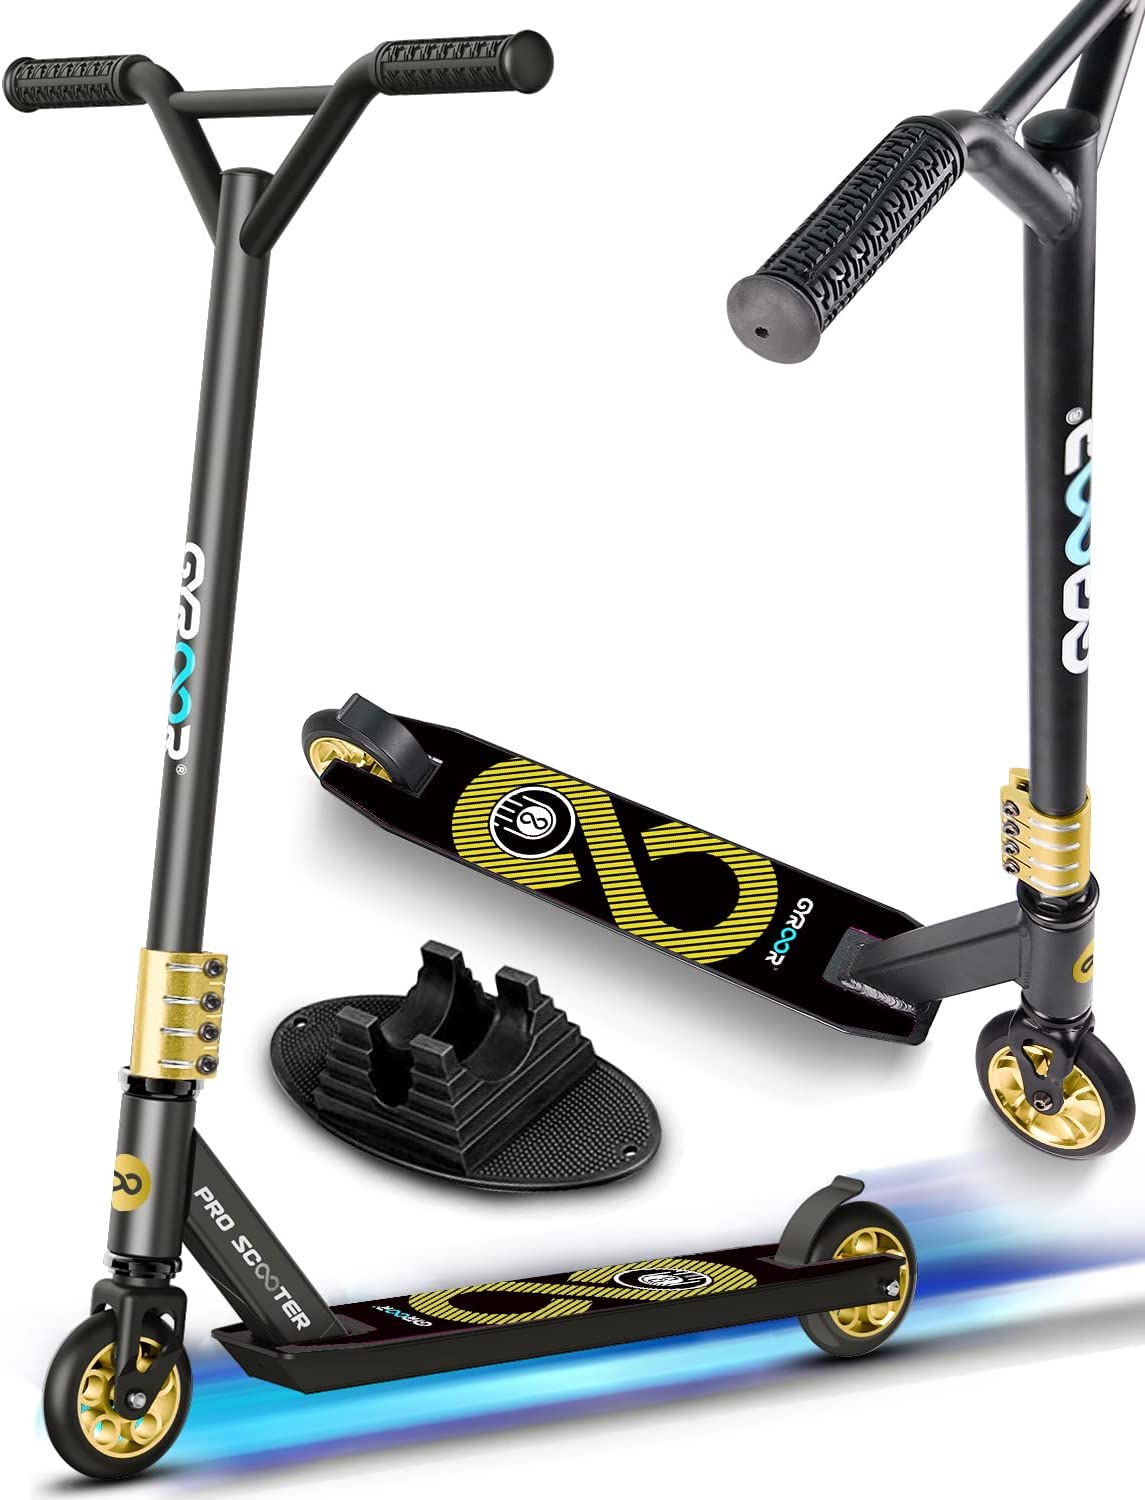 Pro scooter - stunt scooter - trick scooter - Gyroor Z1 scooter - gold